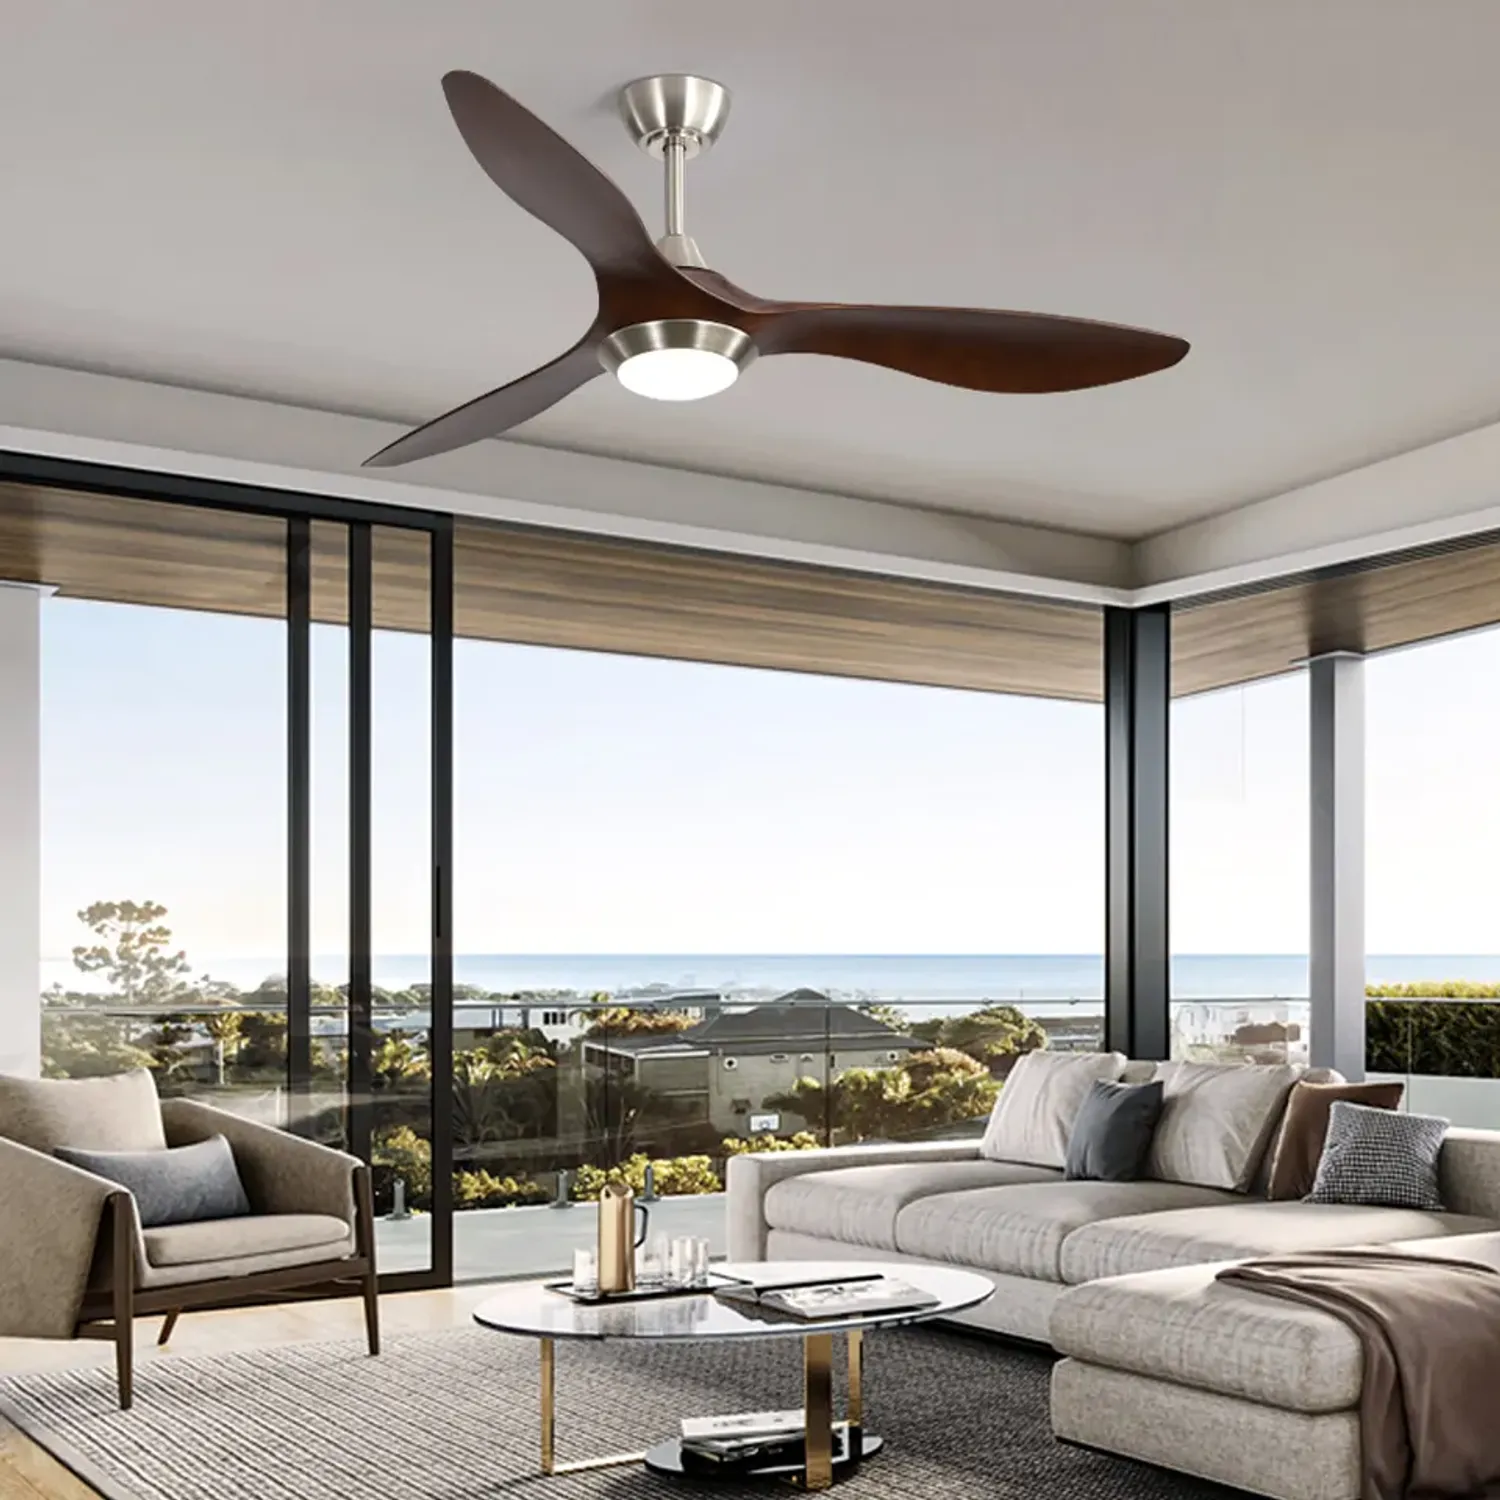 KBS Wood Blade Ceiling Fan with Light and Reverse Airflow in a large living room